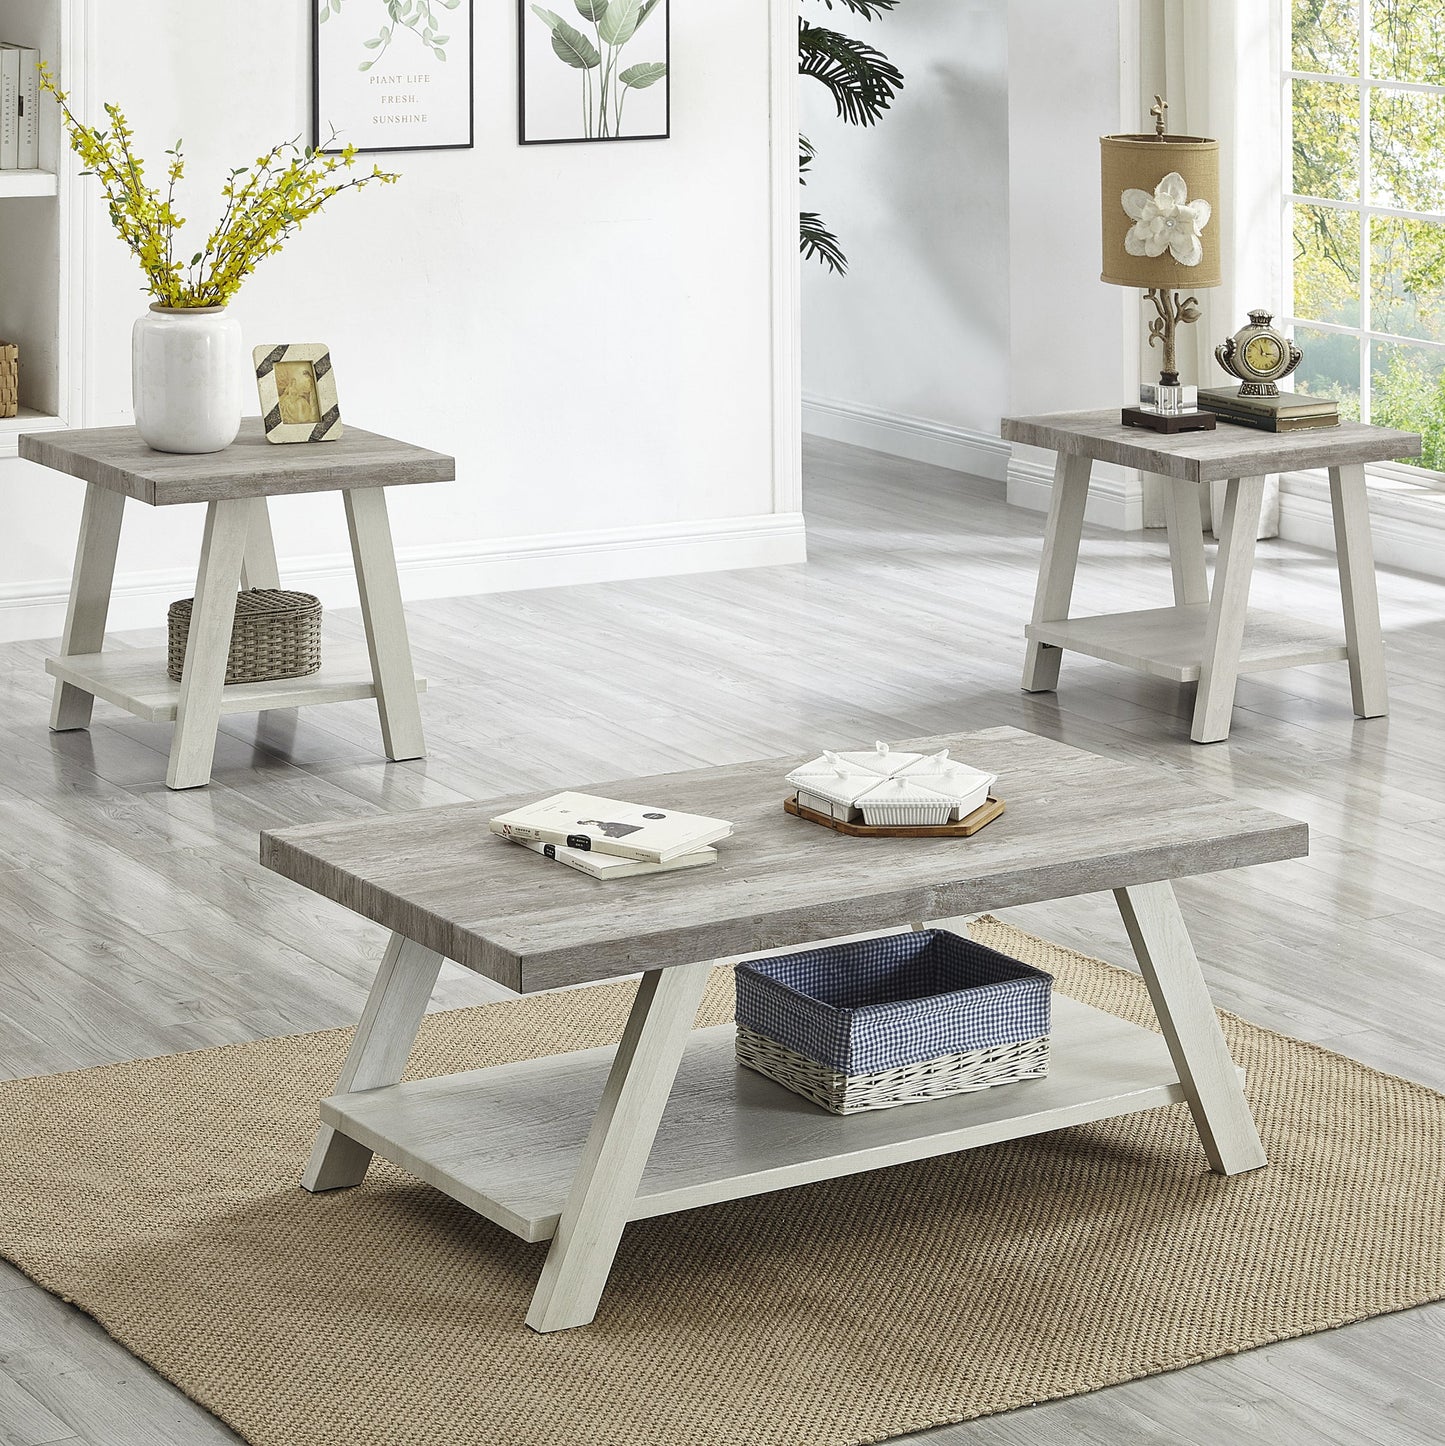 Athens Contemporary 3-Piece Wood Shelf Coffee Table Set in Weathered Gray and Beige